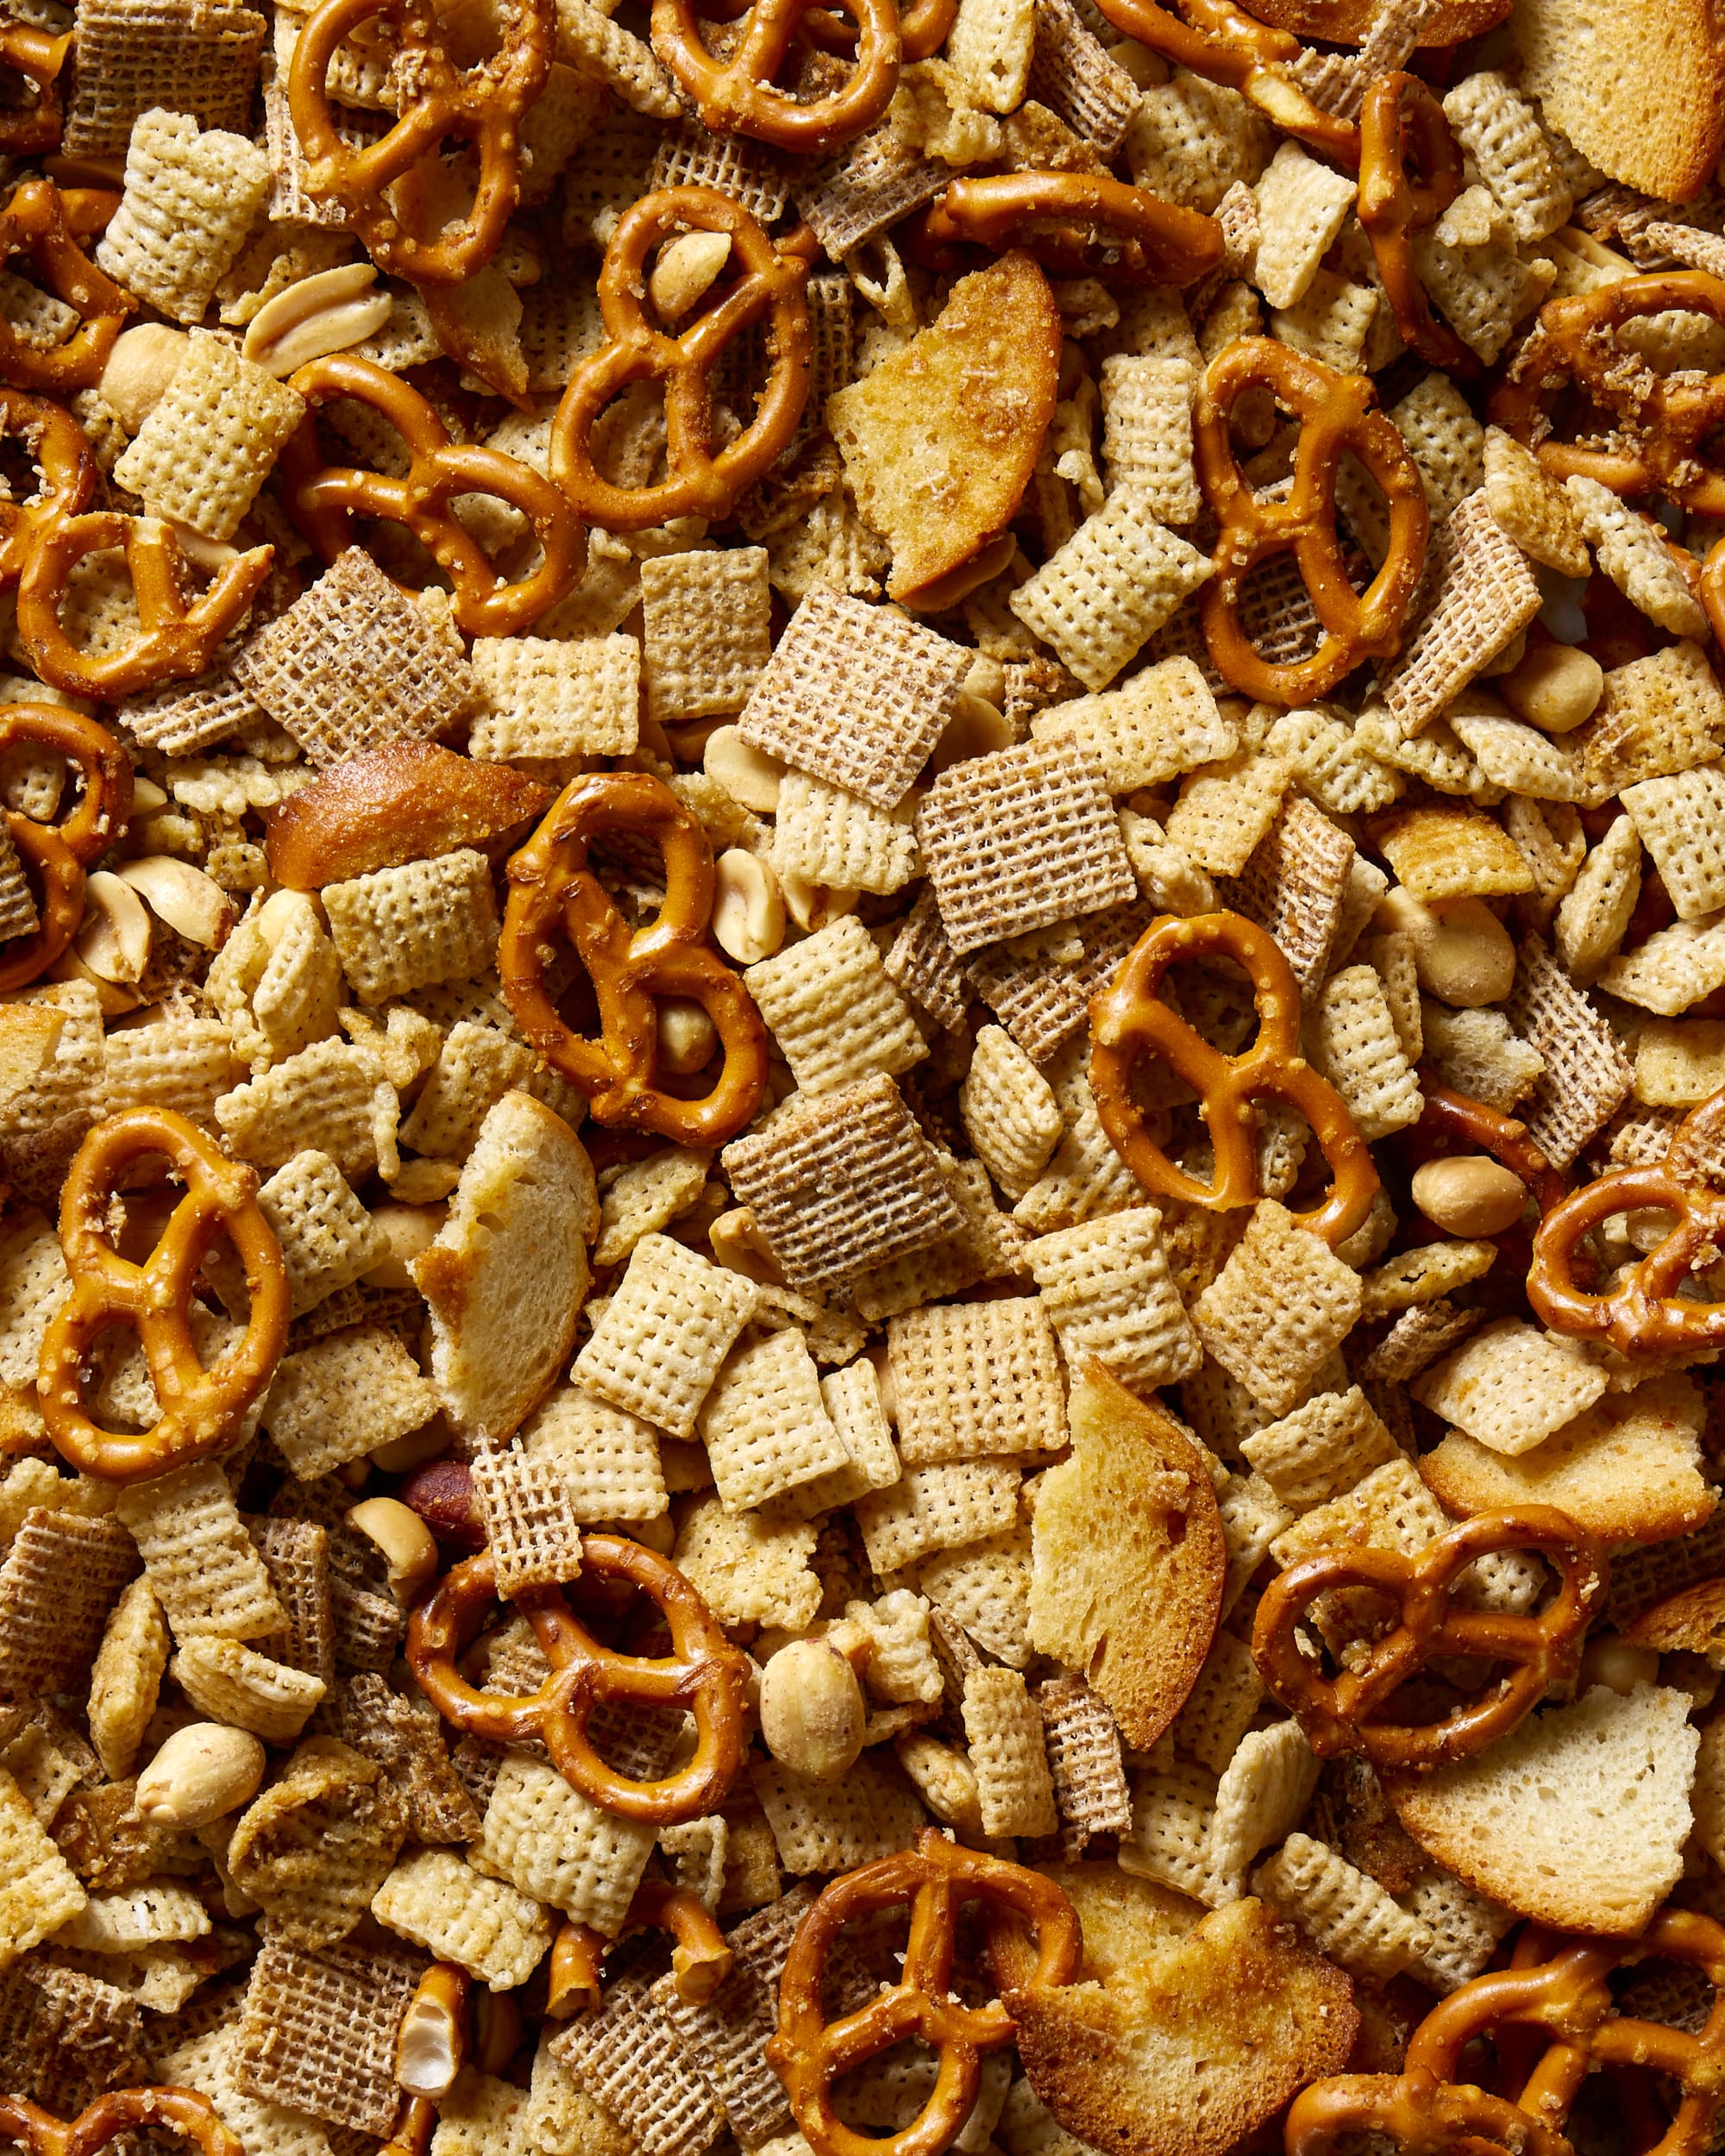 Deep South Dish: Classic Oven Baked Chex Party Mix